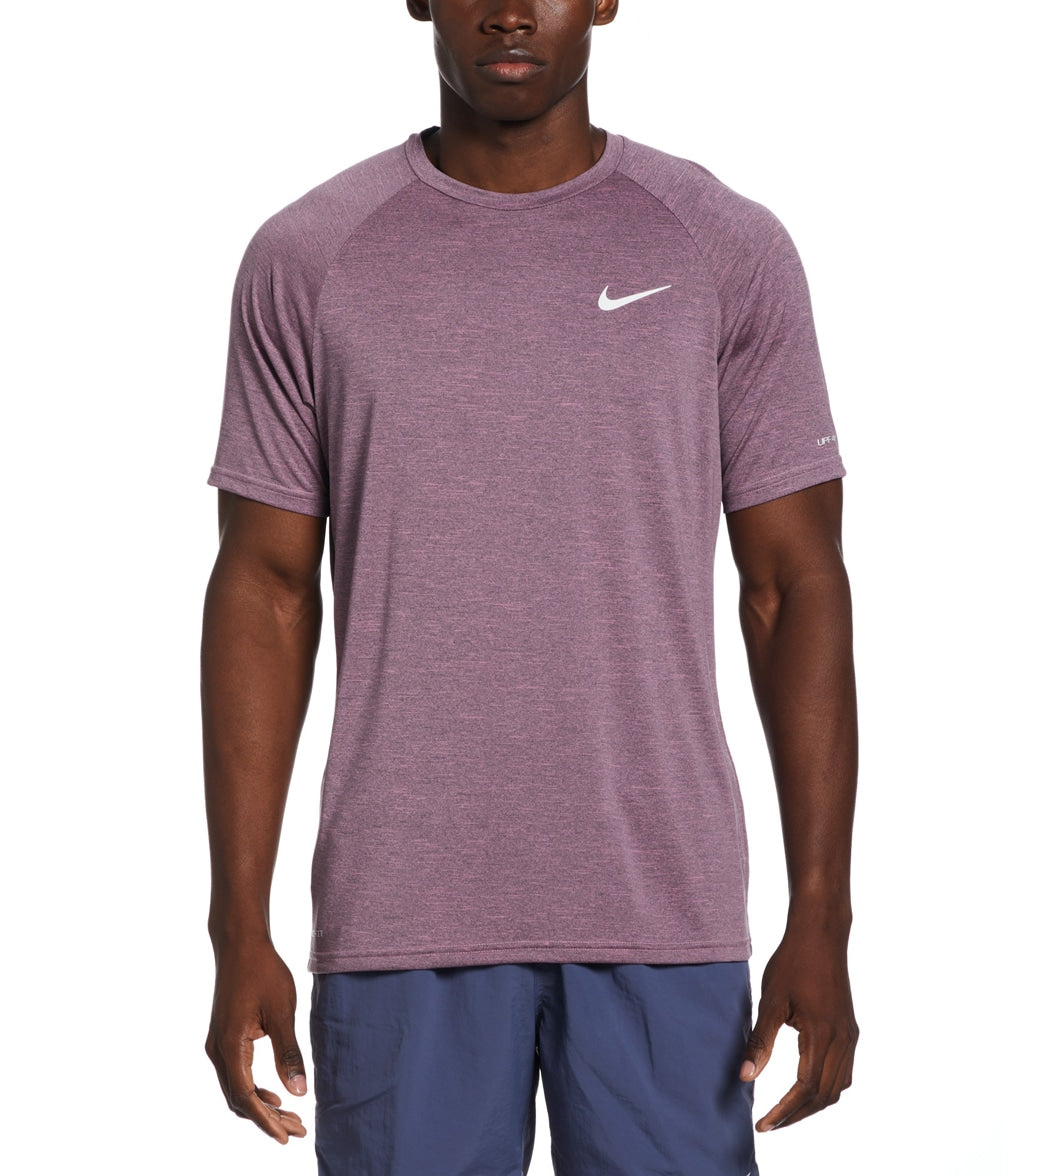 Nike Men's Heather Short Sleeve Hydroguard at SwimOutlet.com